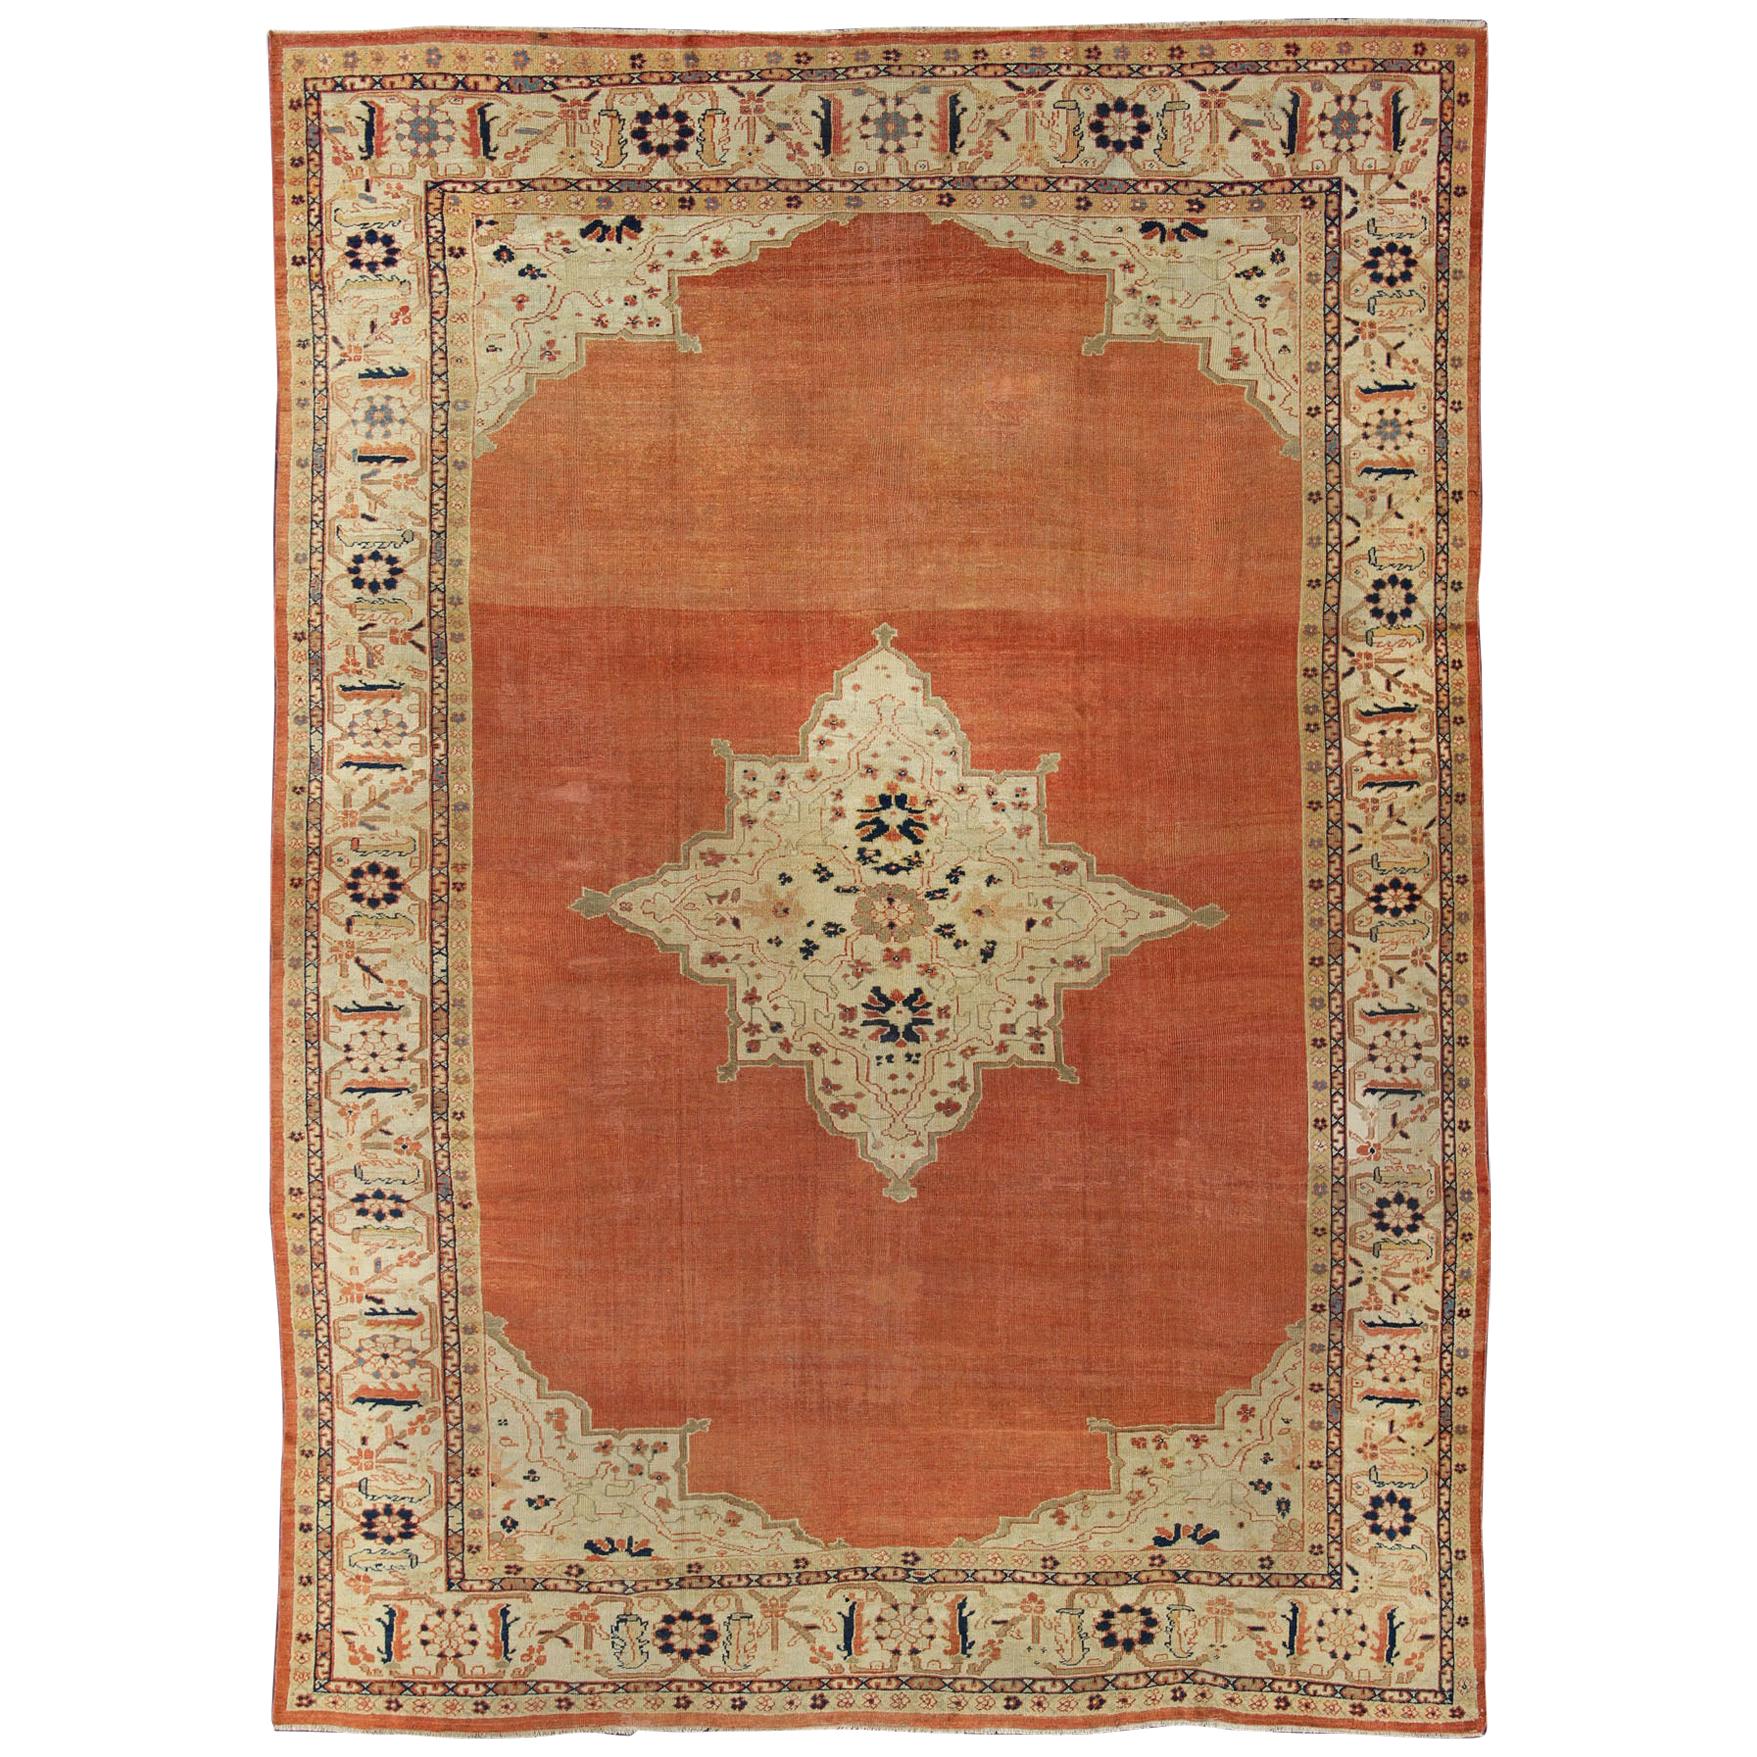 Antique Large Ziegler Sultanabad Rug in Soft Orange, Cream and Navy Blue For Sale